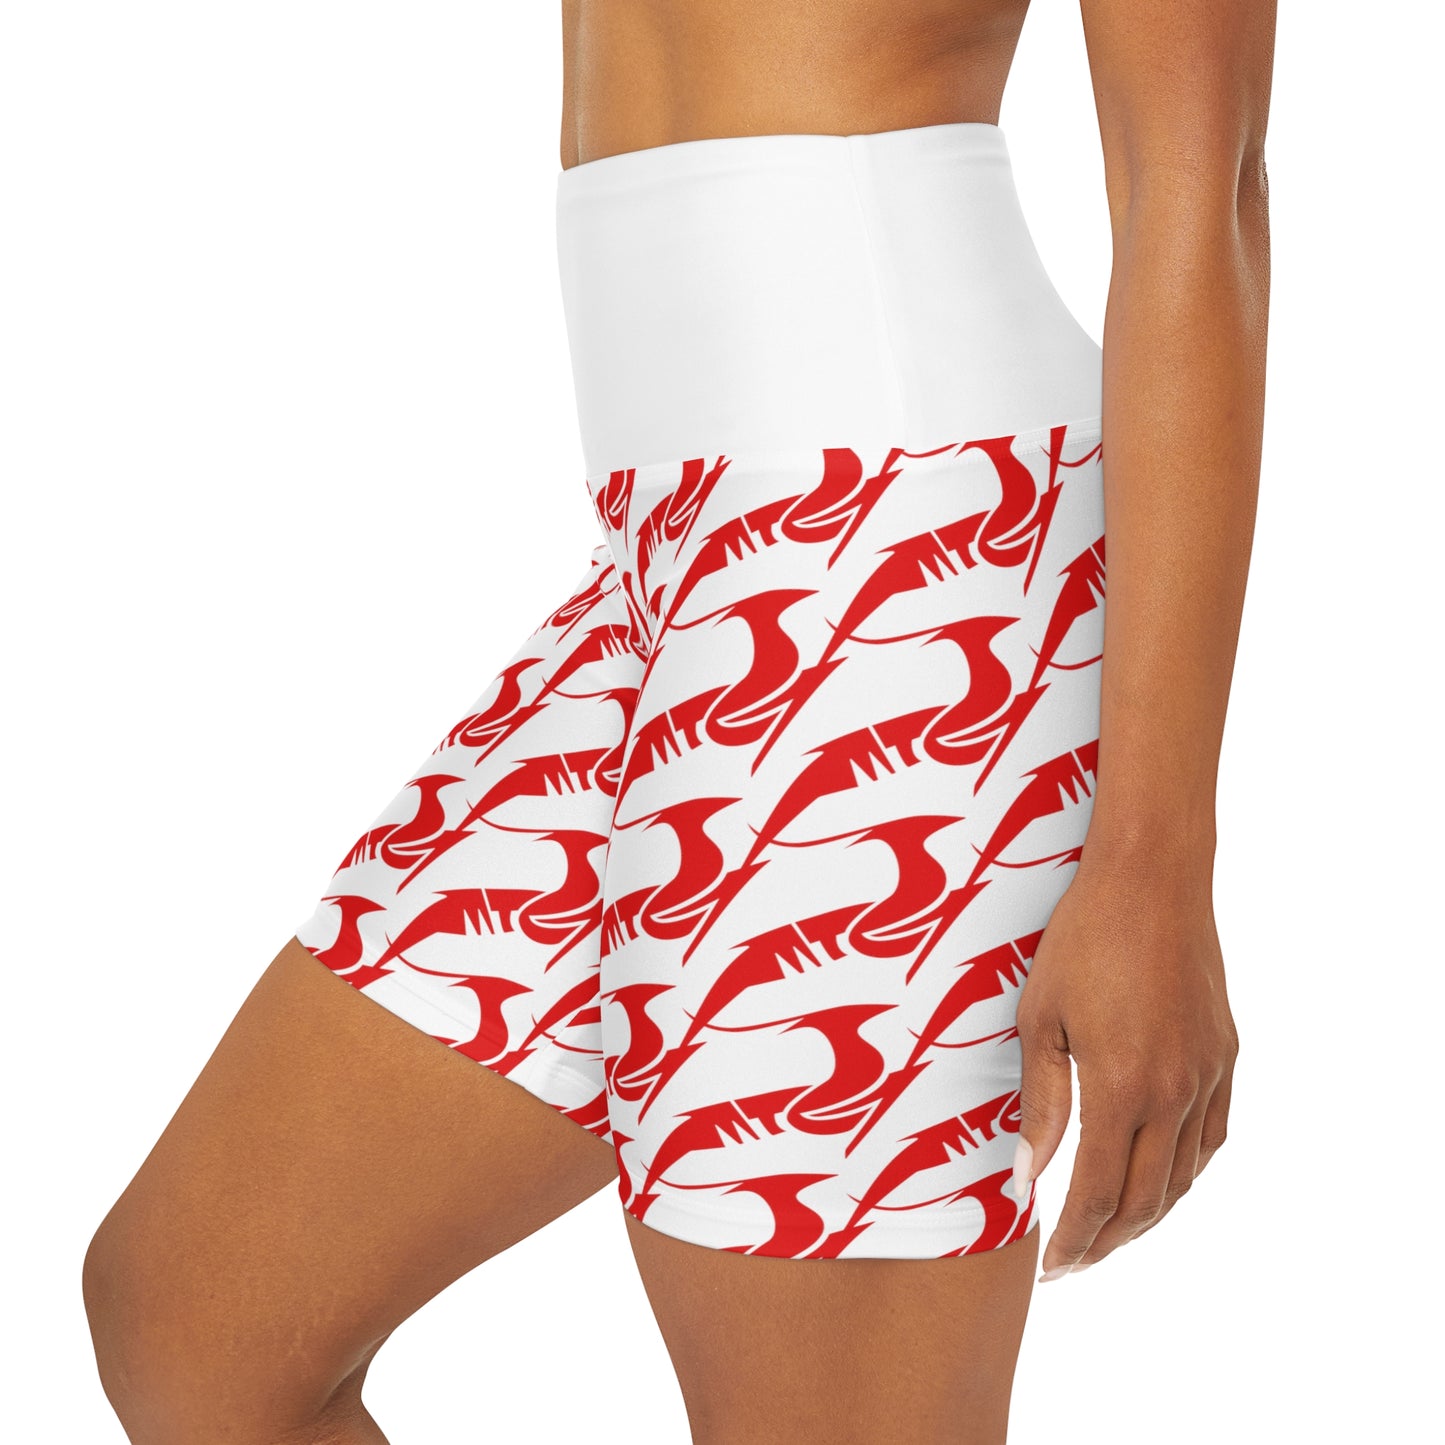 High Waisted Yoga Shorts Red on White